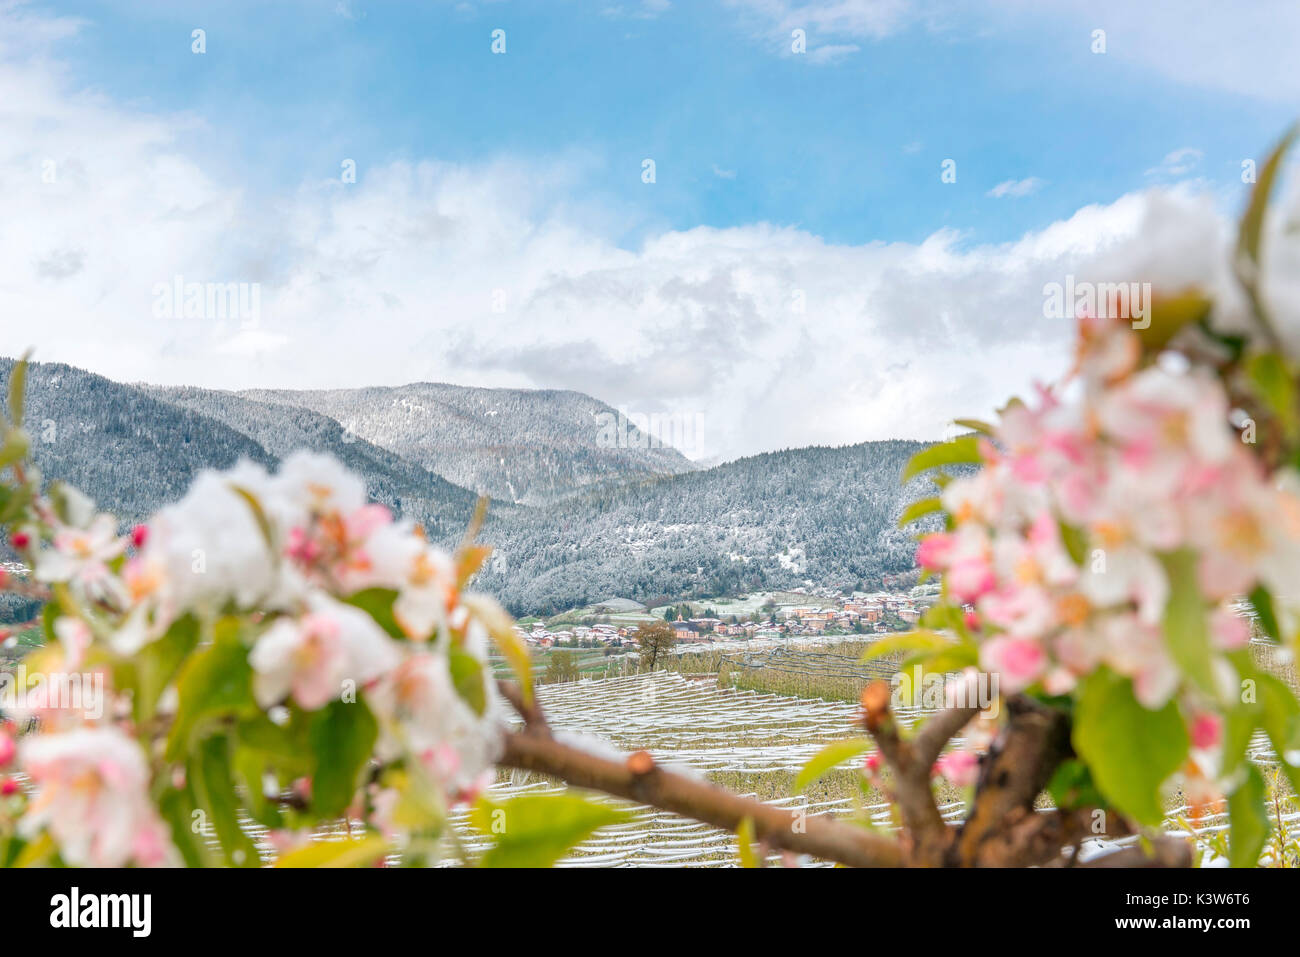 Italy, Trentino Alto Adige, Non Valley, snow on apple blossoms in an unusually cold spring day. Stock Photo